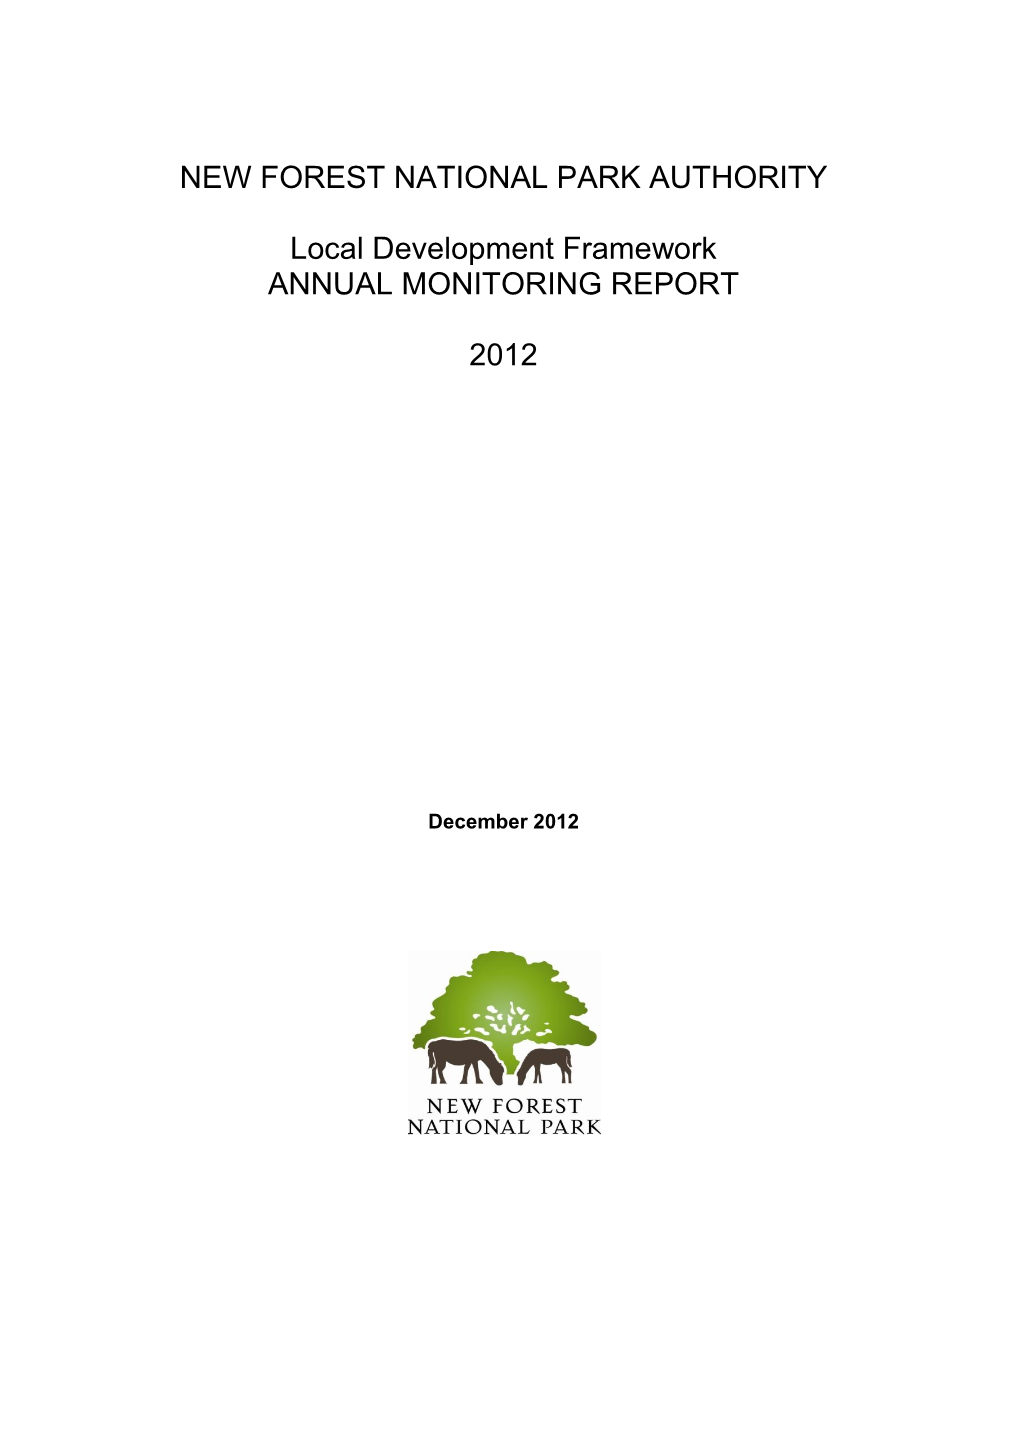 NEW FOREST NATIONAL PARK AUTHORITY Local Development Framework ANNUAL MONITORING REPORT 2012